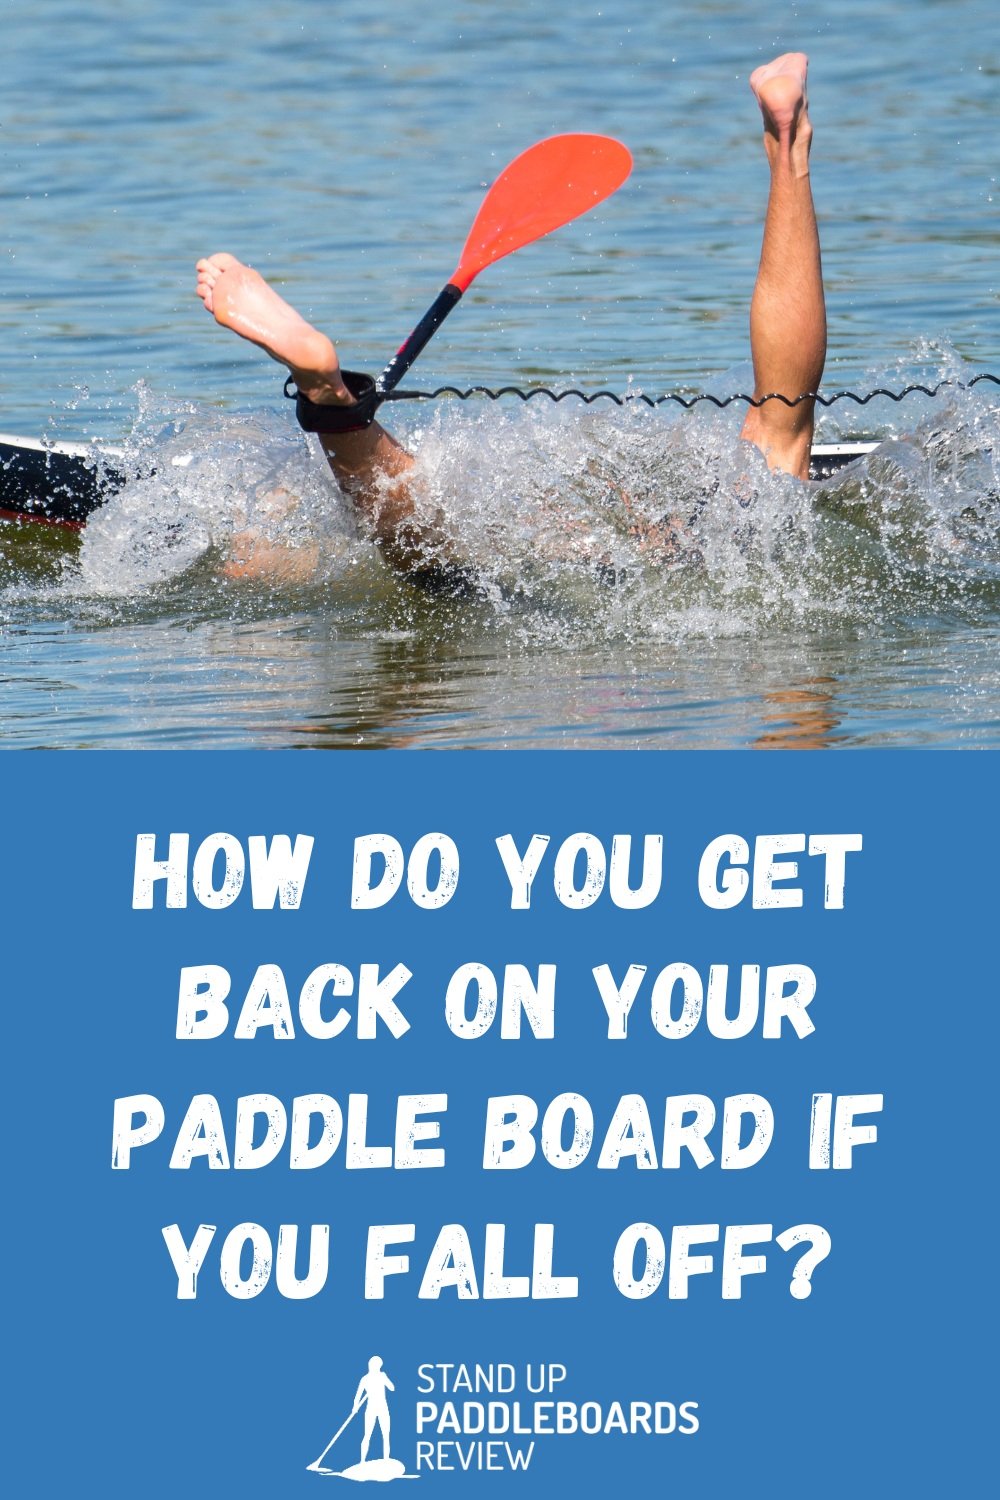 How Do You Get Back on Your Paddle Board If You Fall Off? - Stand Up ...